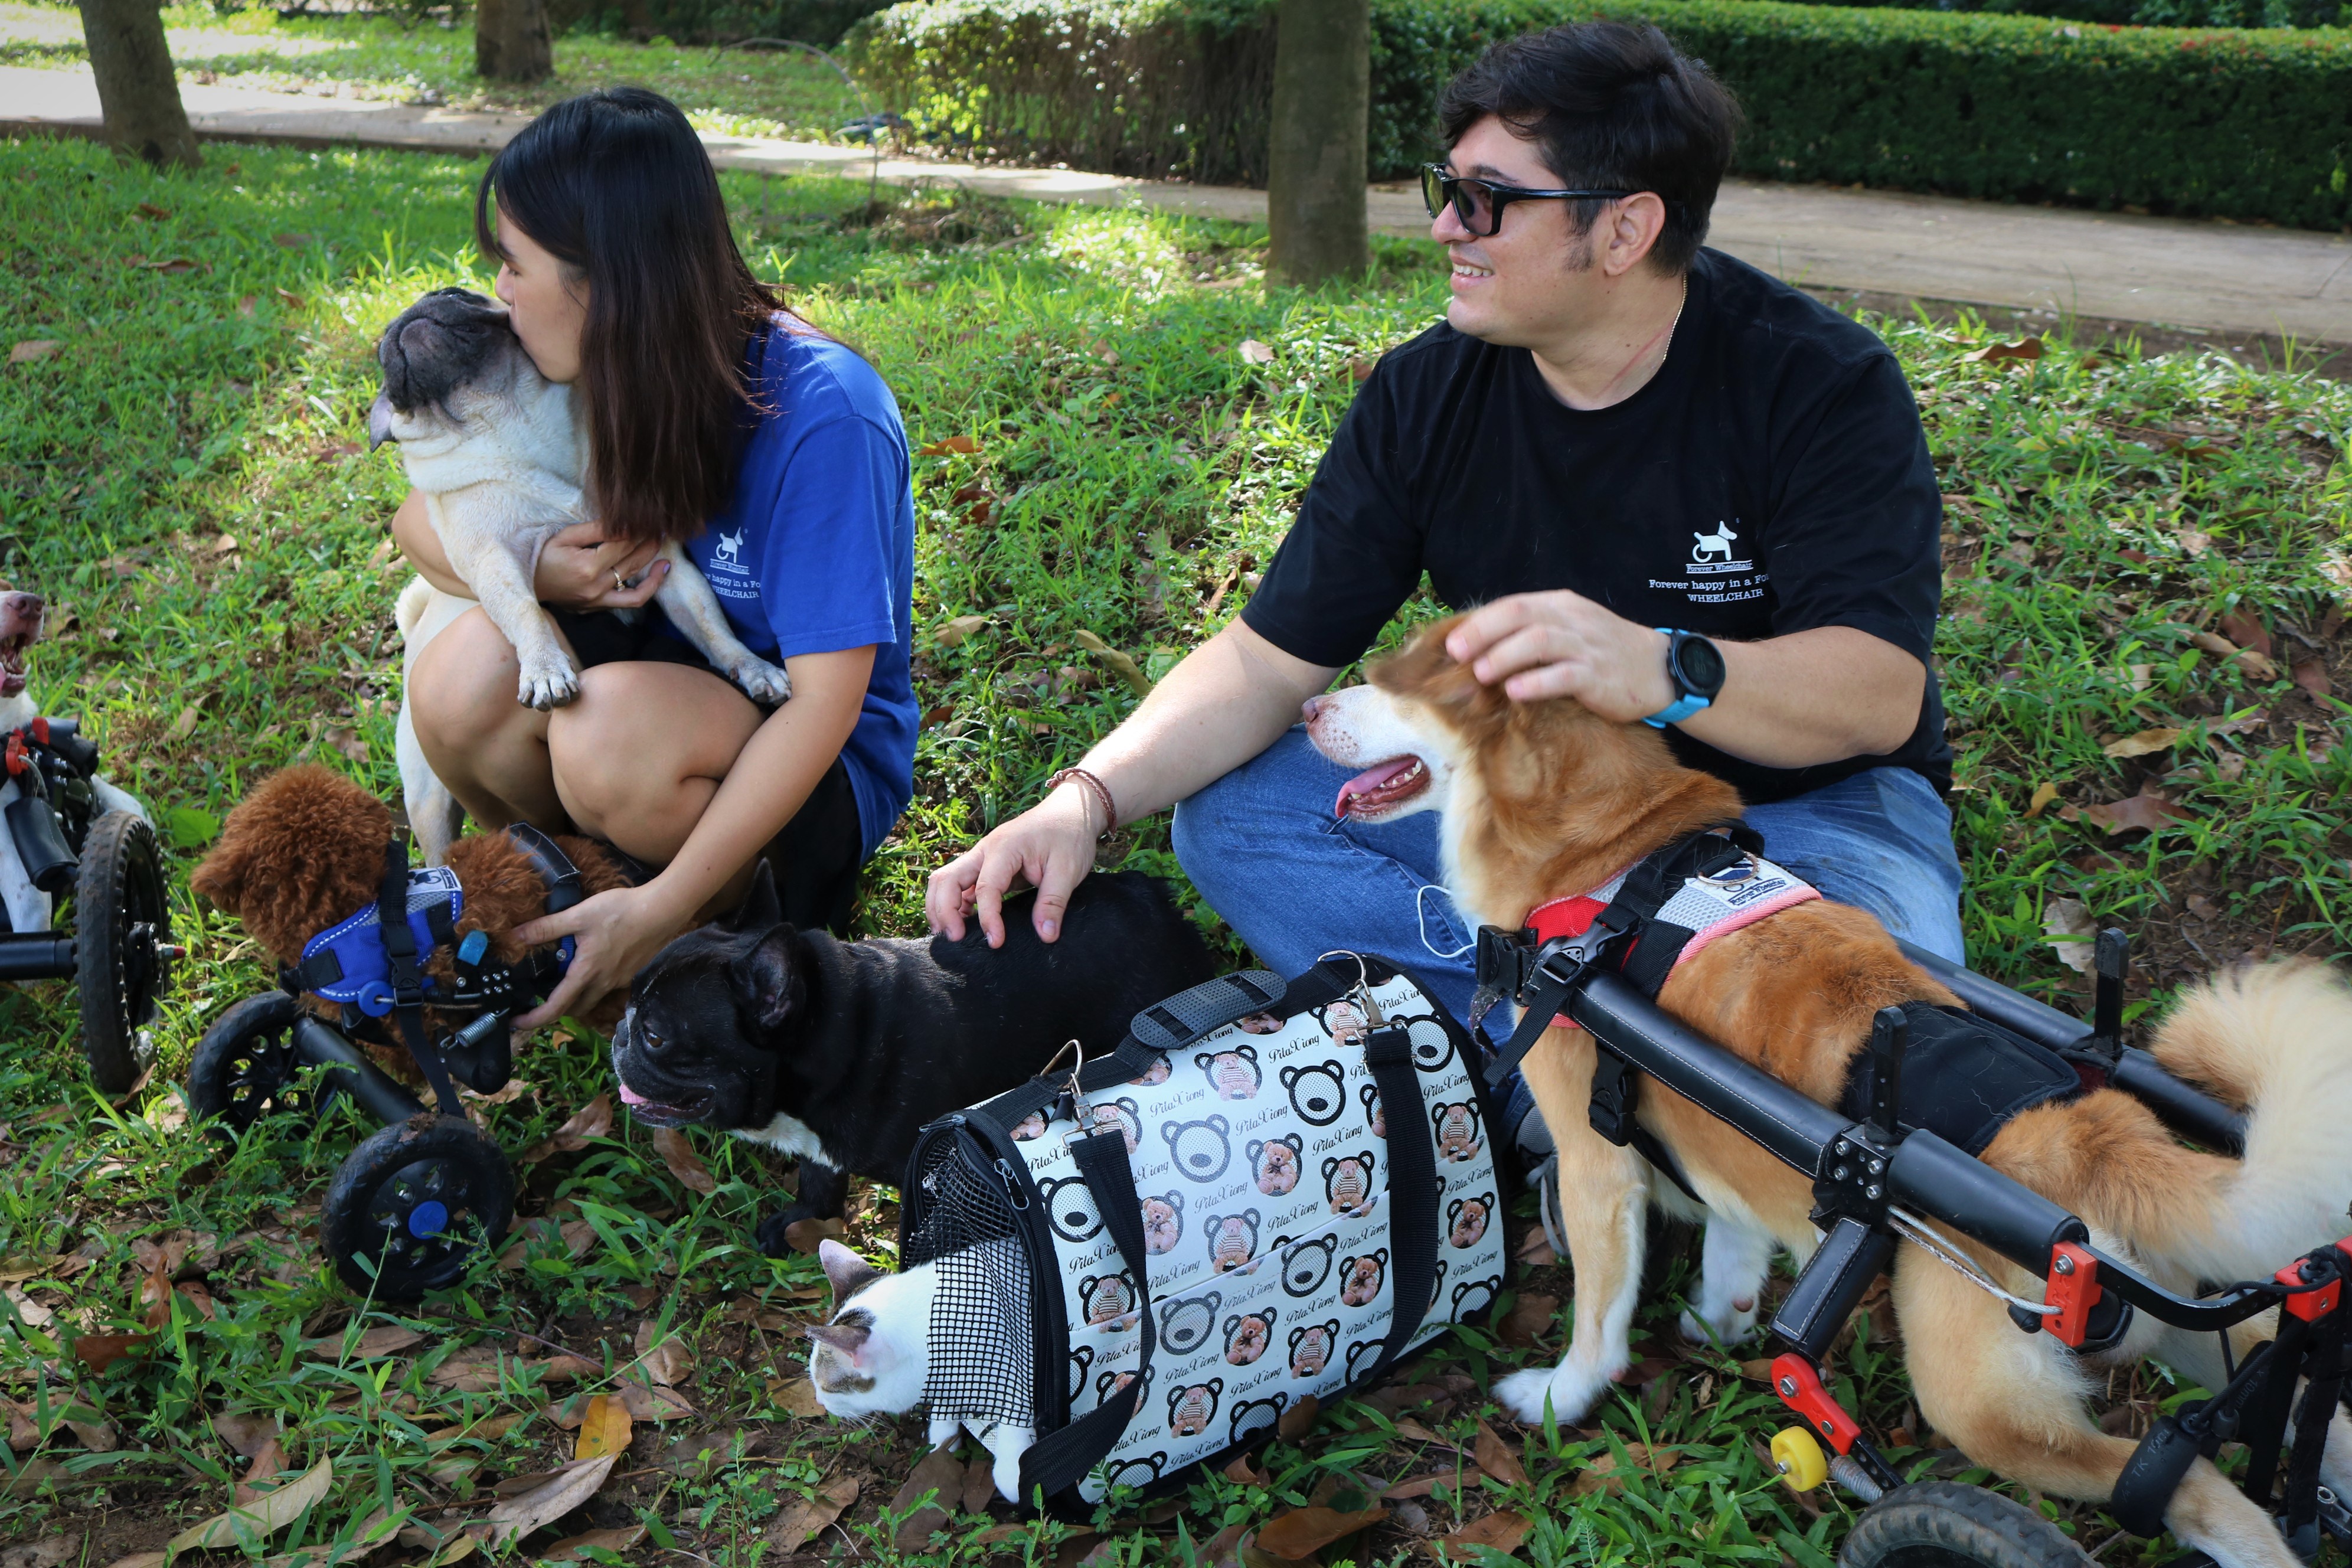 Colombian Oscar Fernando Ruiz Bonilla and his Vietnamese wife Tran Anh Thu take a rest while walking their ten dogs at a park near their house in Ho Chi Minh City’s District 9 on October 19, 2021. Photo: Hoang An / Tuoi Tre